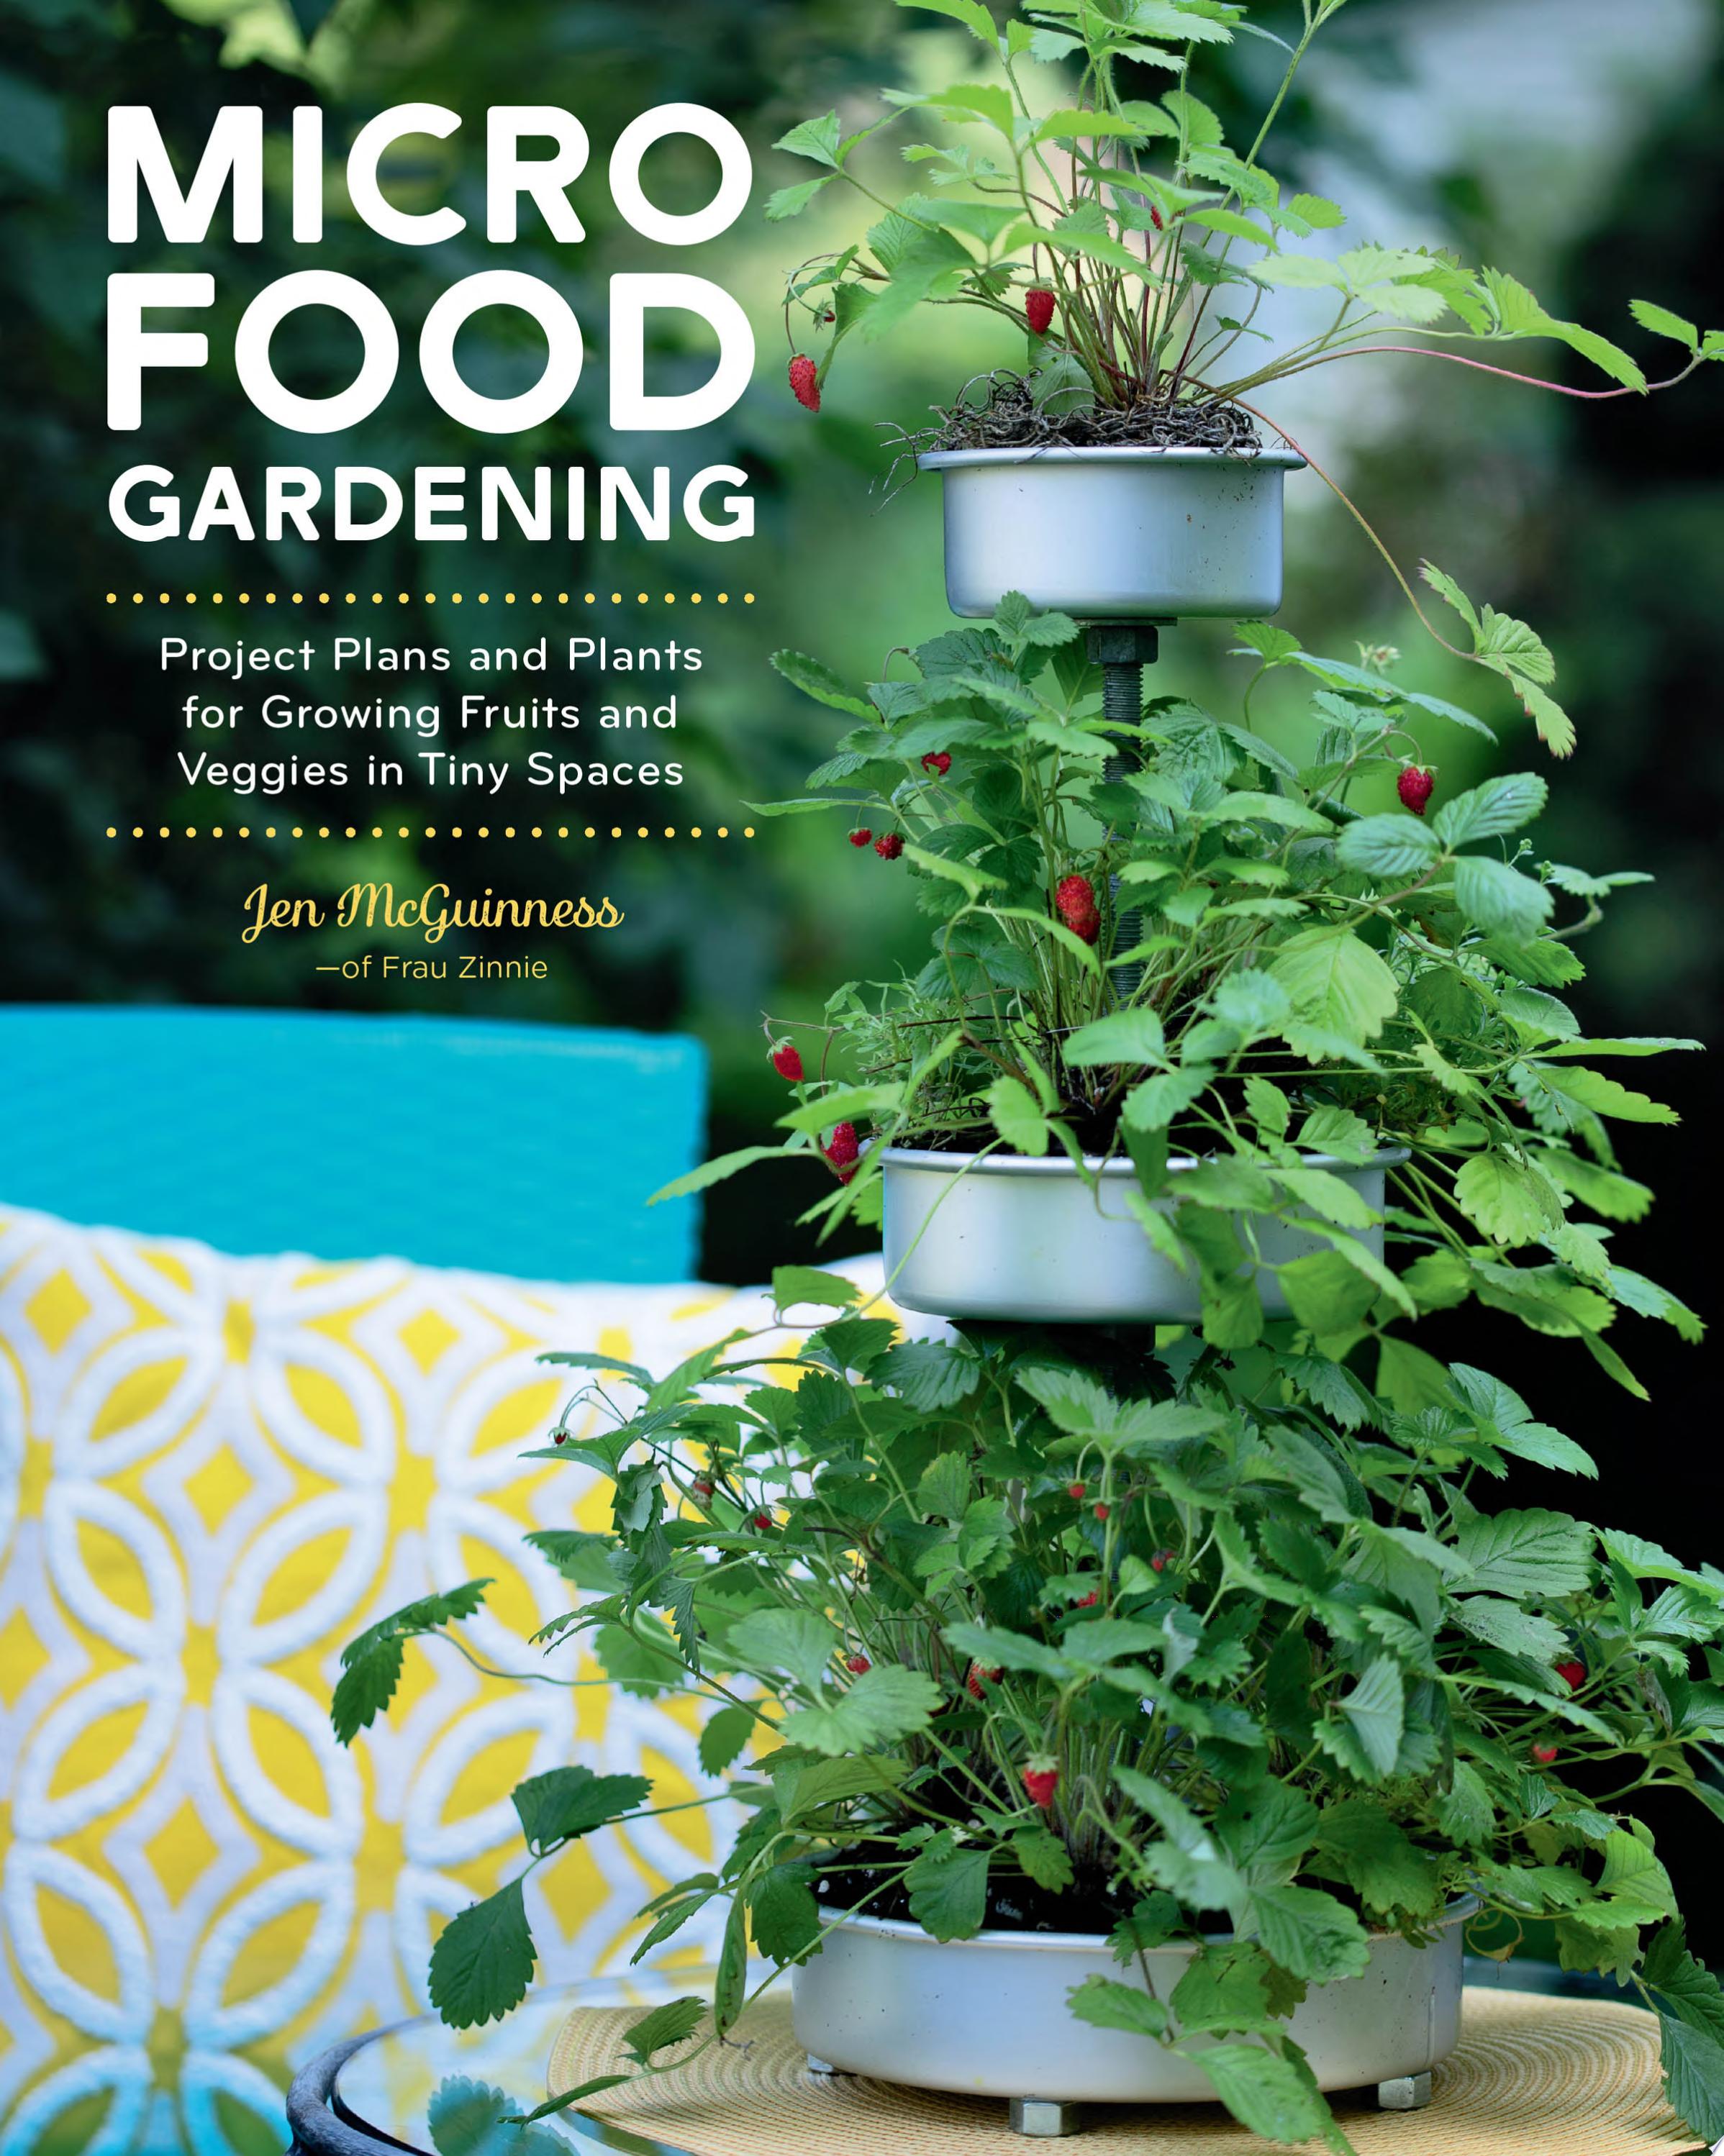 Image for "Micro Food Gardening"